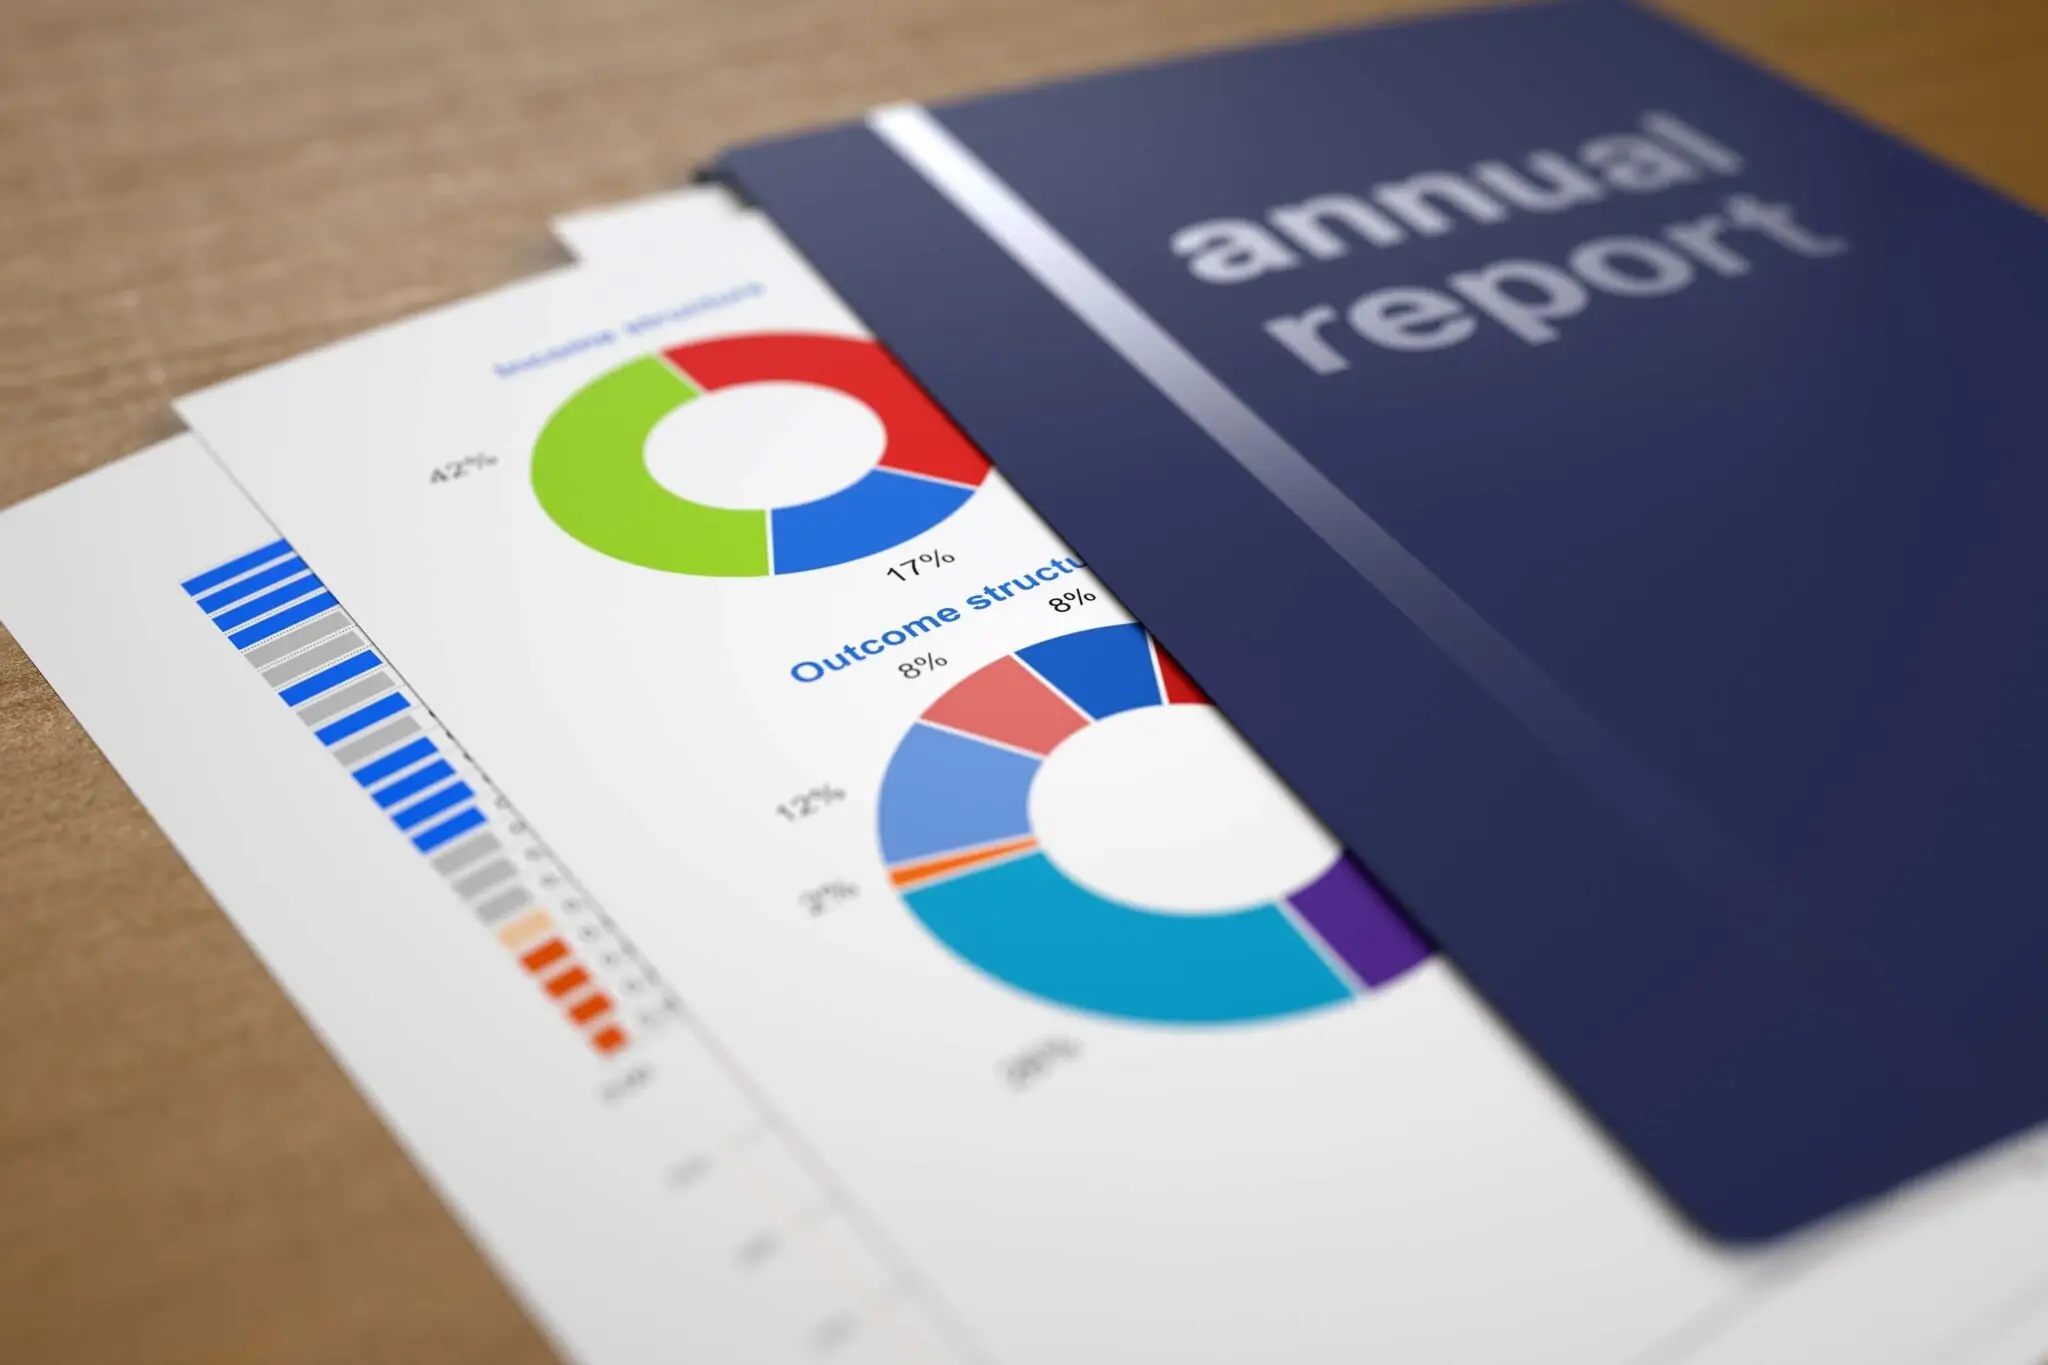 The three key elements of Annual Reports: Advisory, content and design